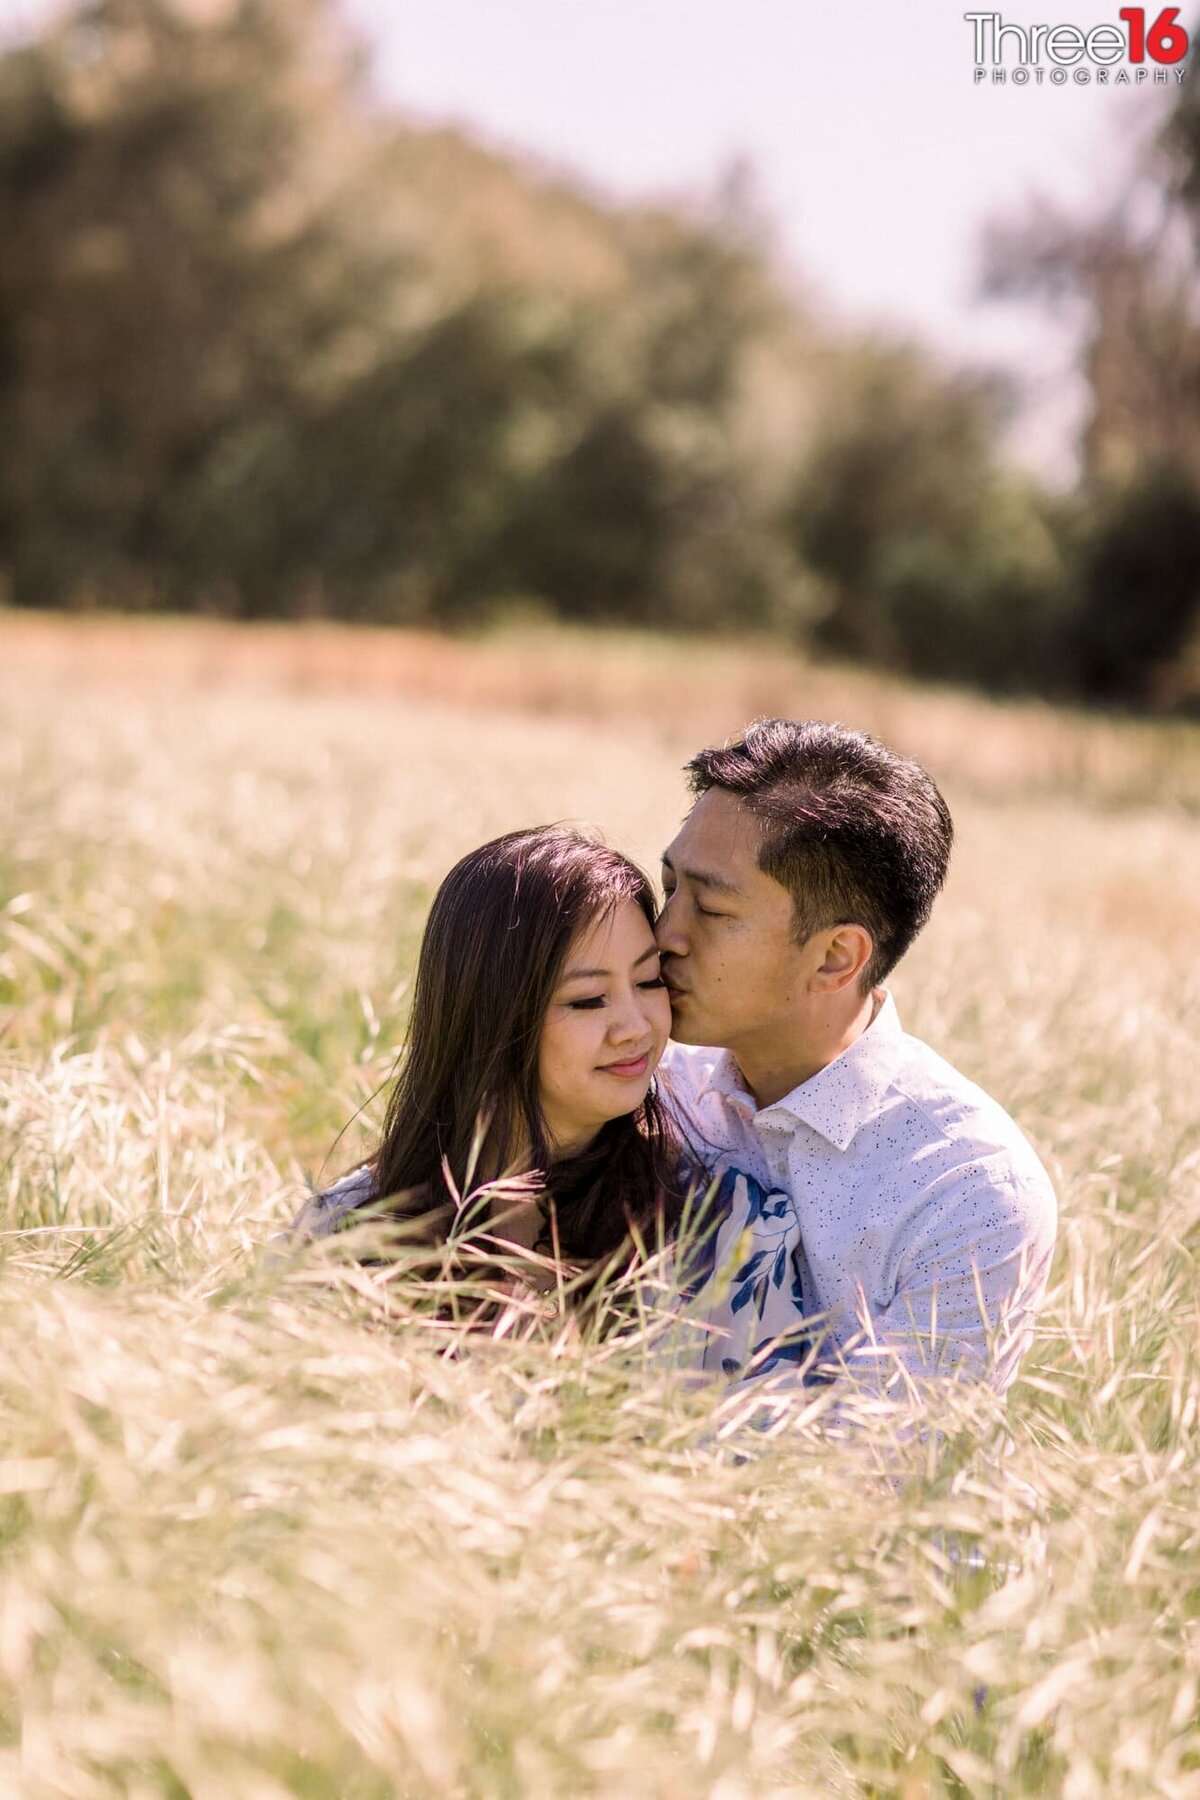 Romantic gesture as Groom to be kisses his fiance's cheek while sitting in tall grass